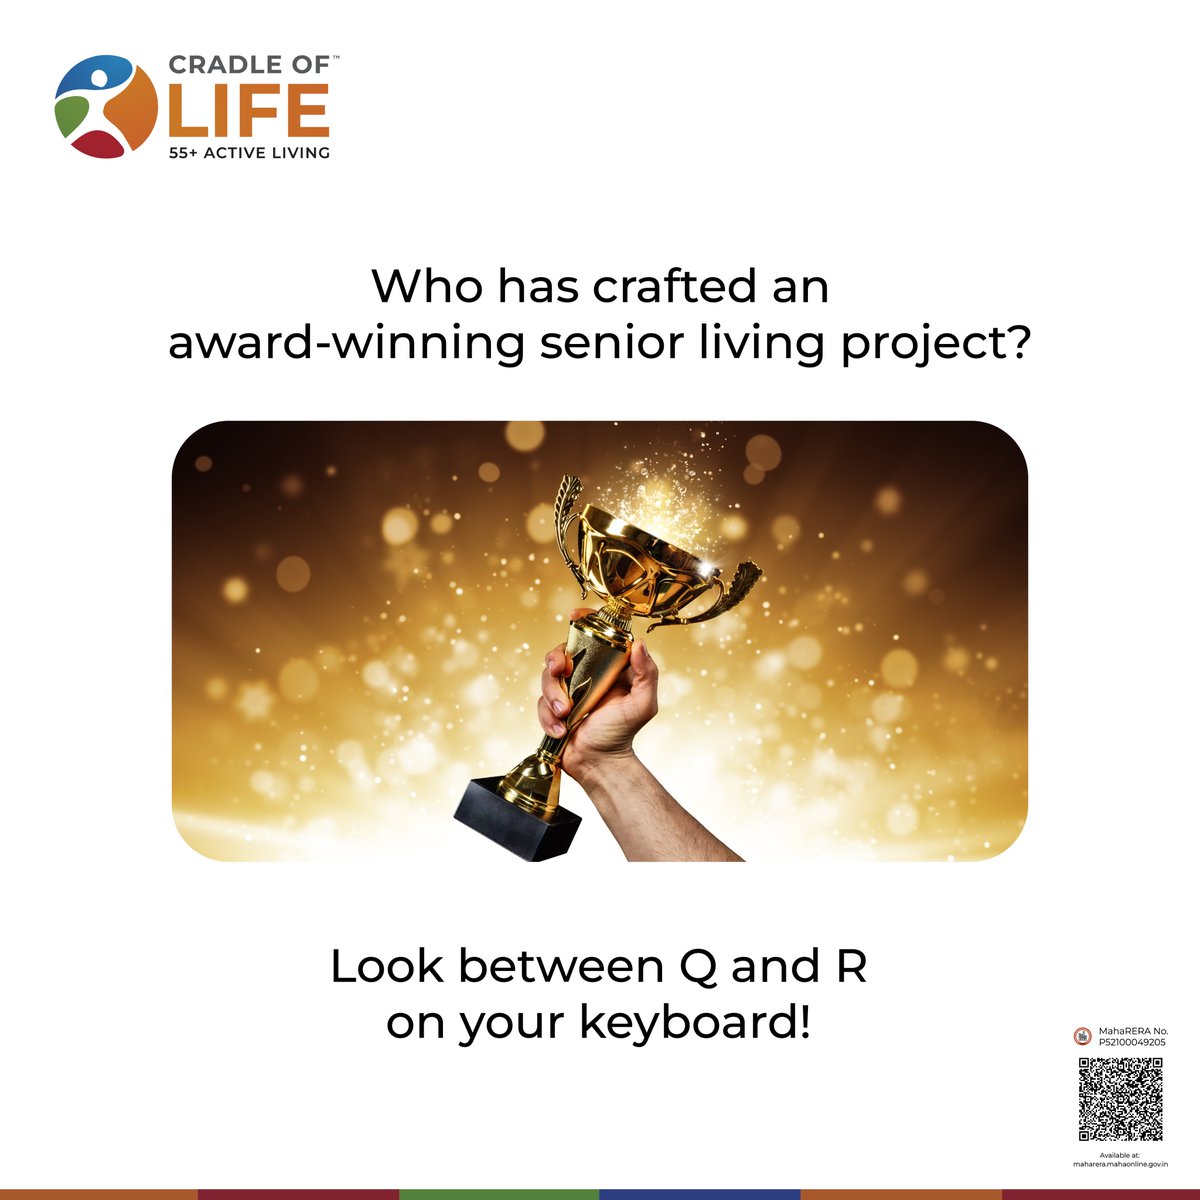 When it comes to providing the best senior living experience, Cradle of Life is the ultimate choice!

MahaRERA No: P52100049205

#JoyfulLiving #ActiveLiving #DynamicLiving #CradleOfLife #SeniorLiving #TimeForYourself #KeyboardTrend #MomentMarketing